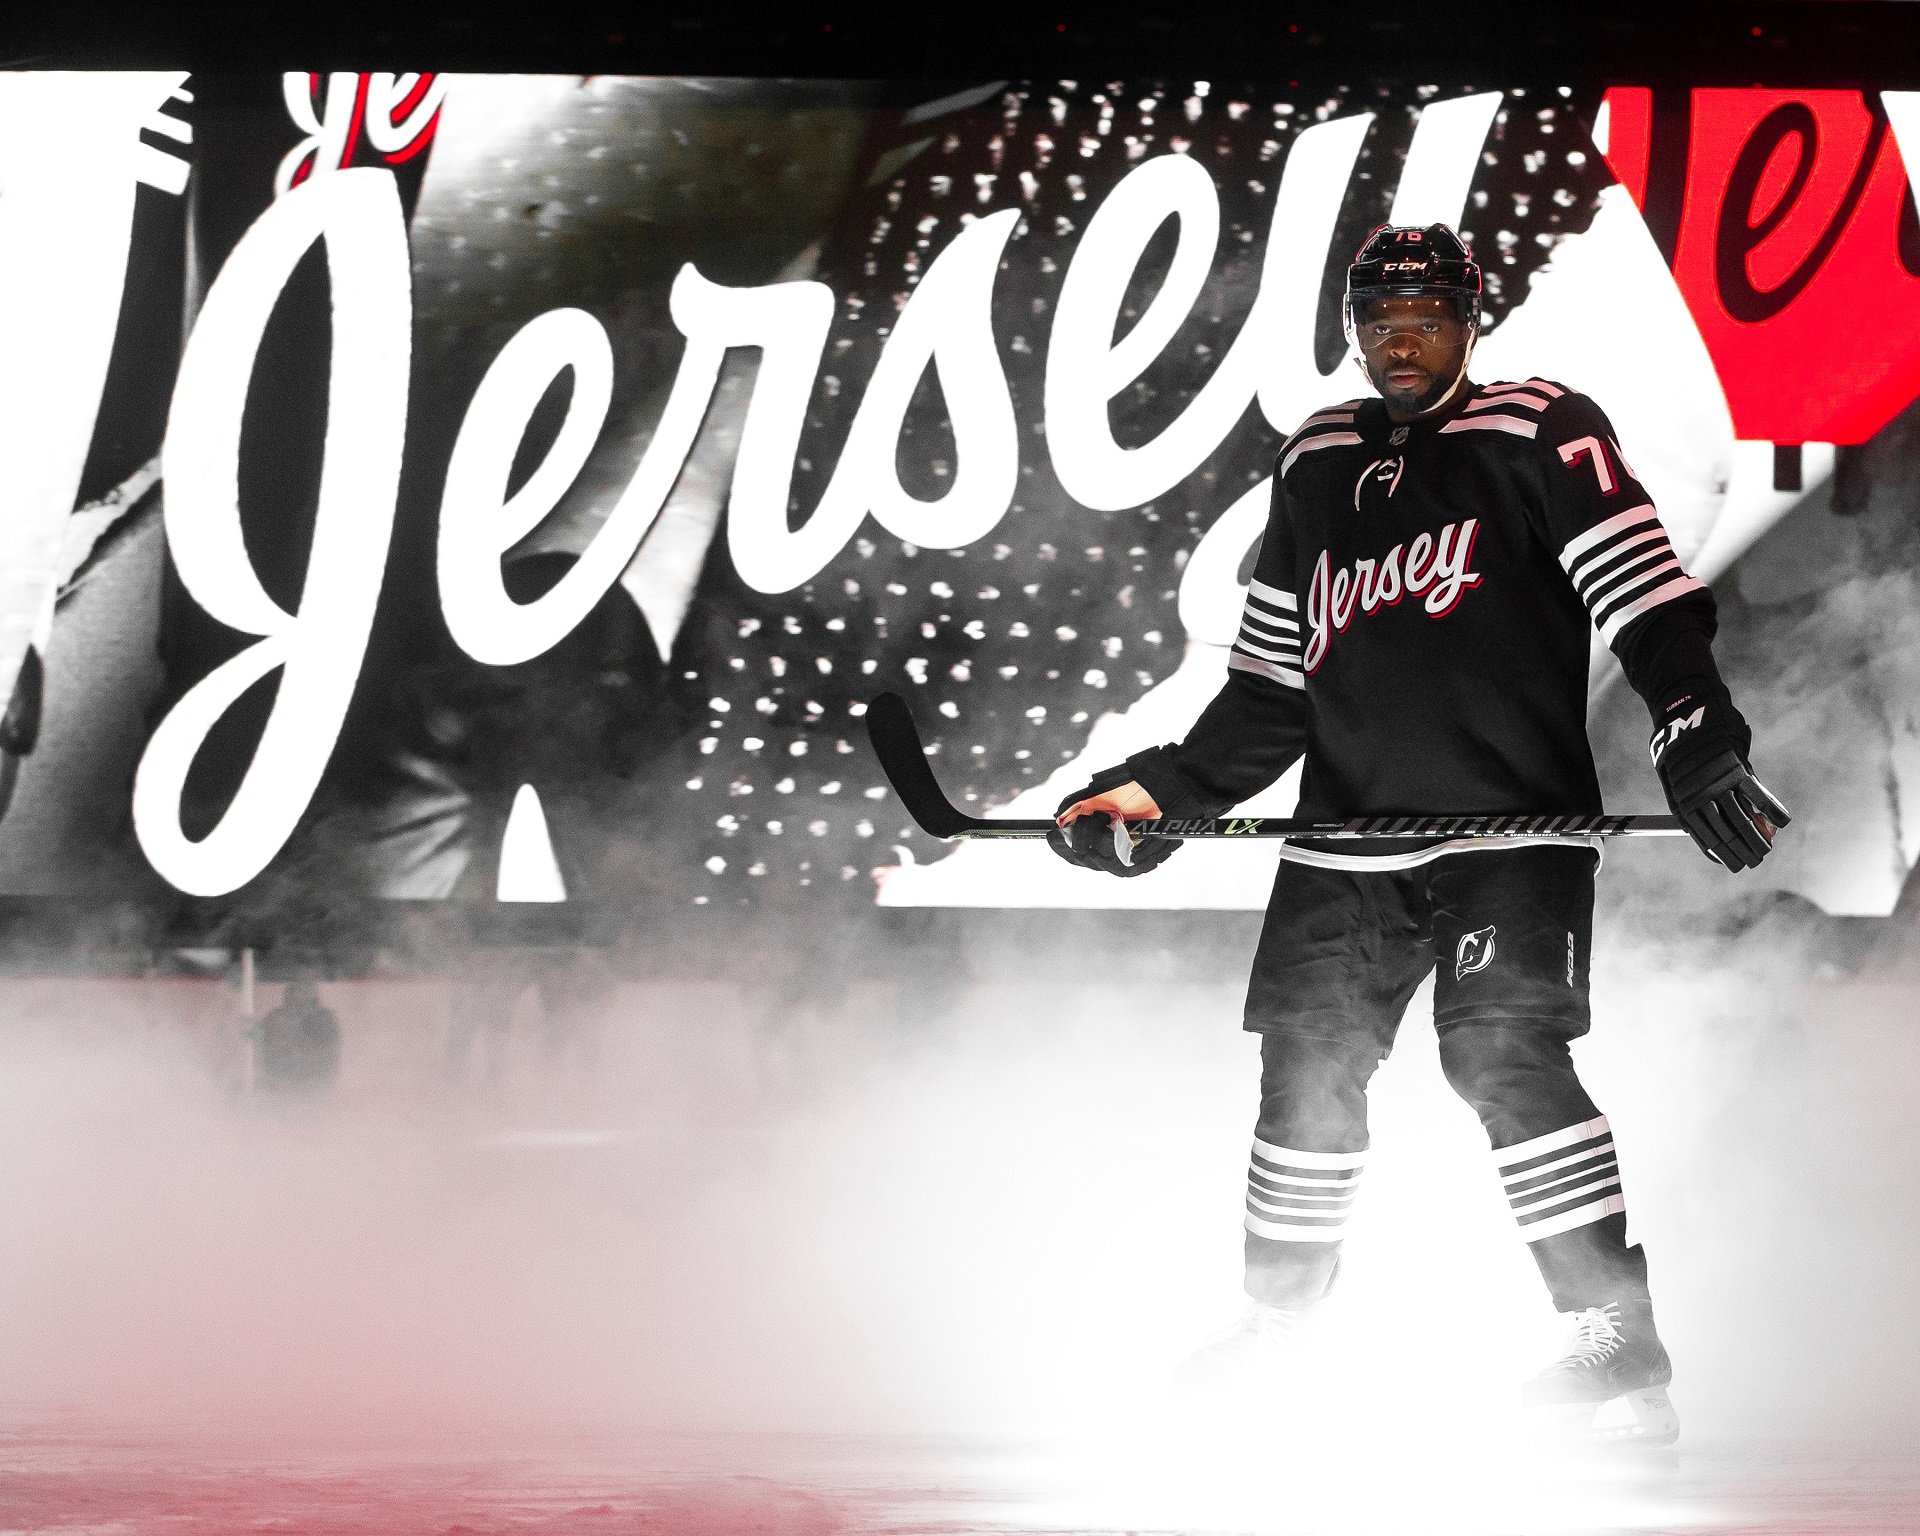 Devils unveil a third jersey, black with 'Jersey' on front, Taiwan News